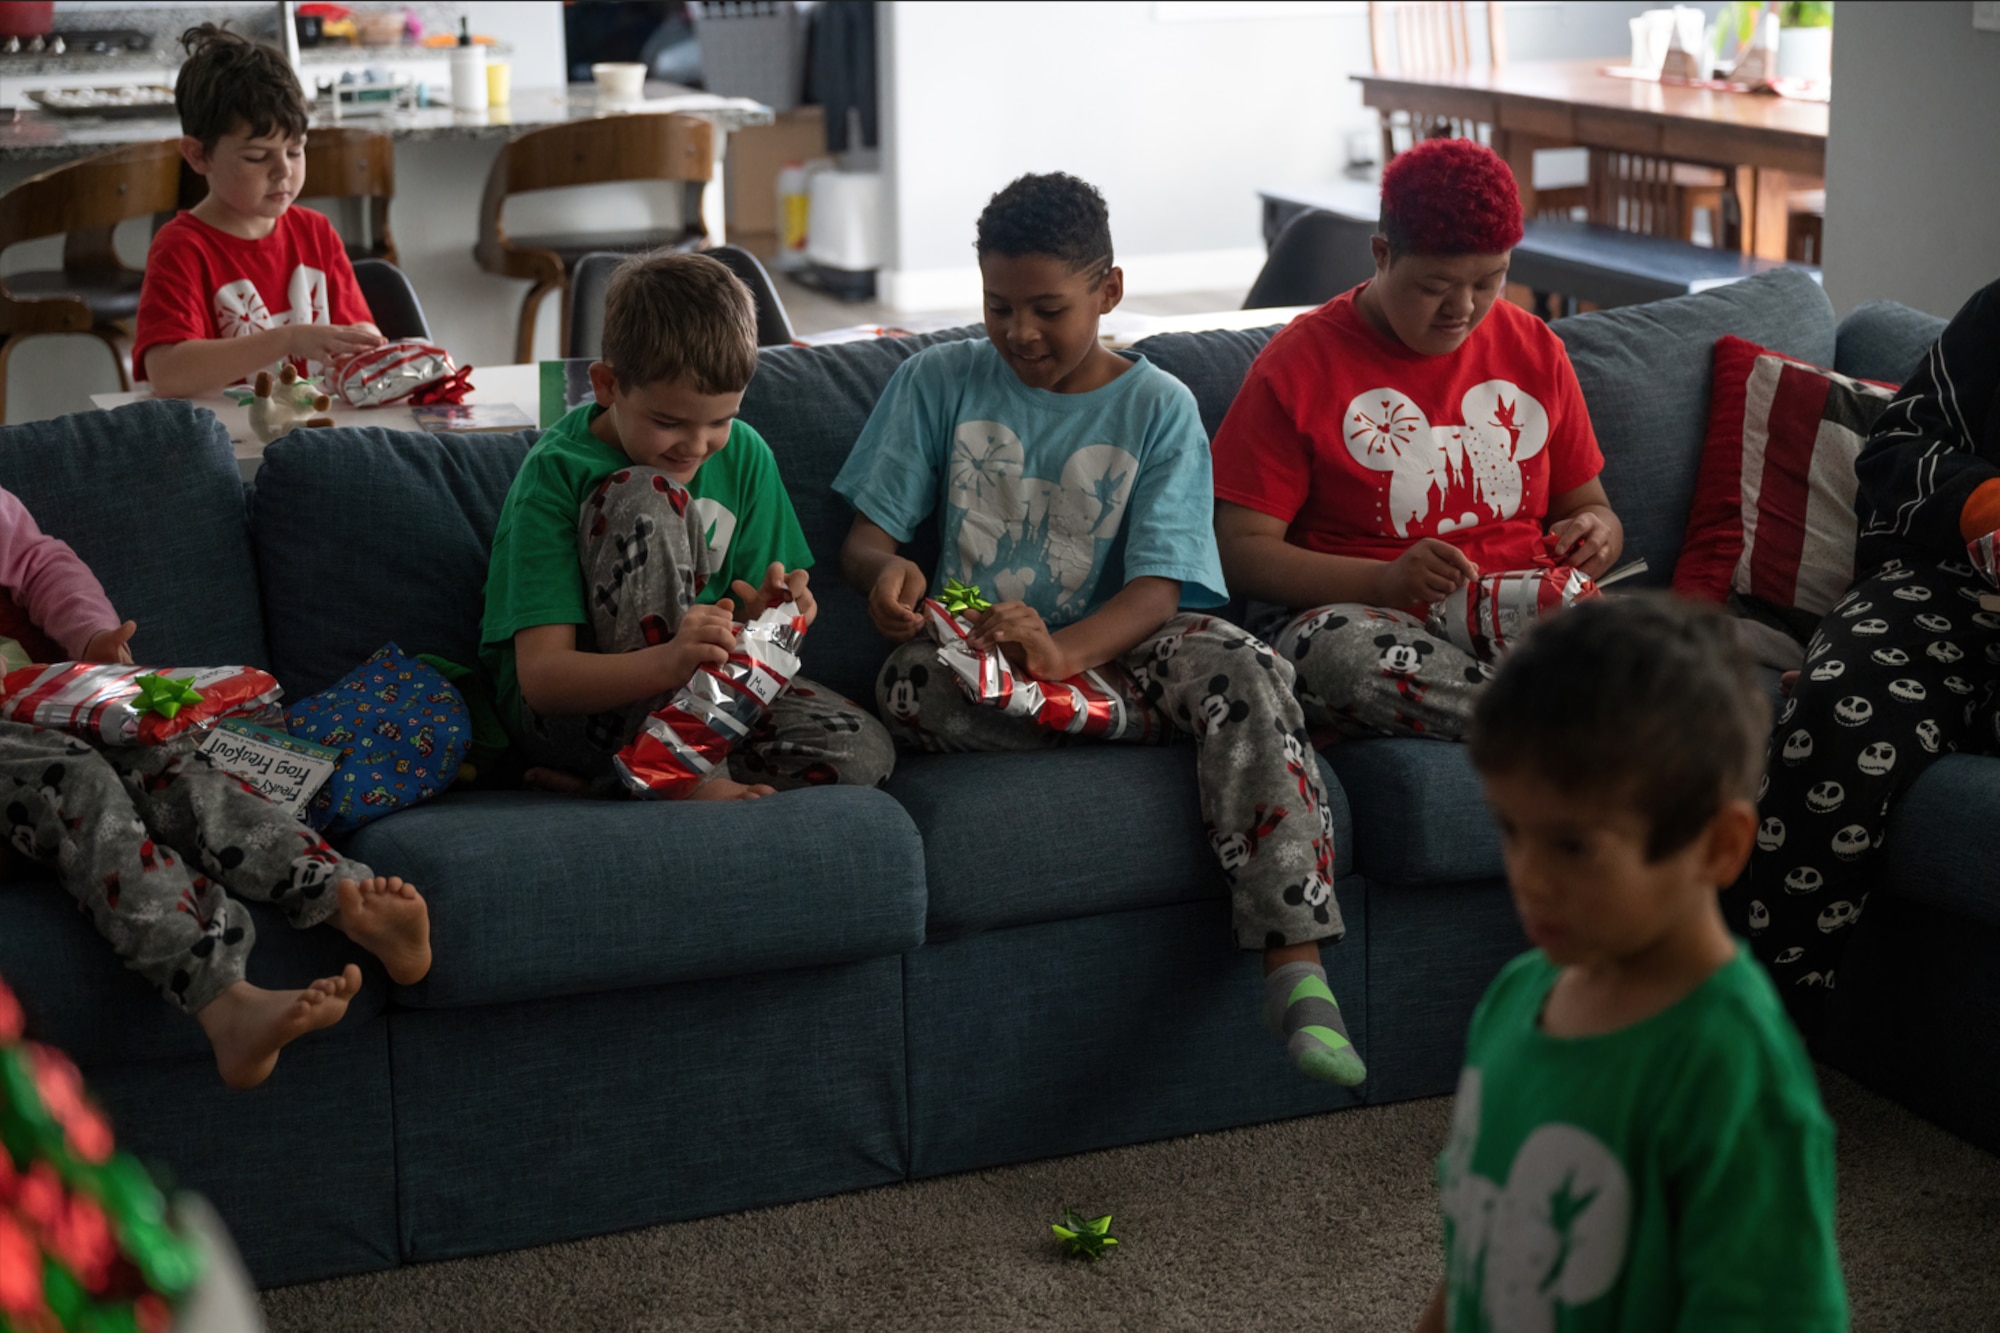 On December 14, 2022, Airmen from the 419th Fighter Wing, 388th Fighter Wing, 649th Munitions Squadron, 75th Air Base Wing, and other mission partners volunteered their time to gather and deliver hundreds of gifts to the foster care families of northern Utah.